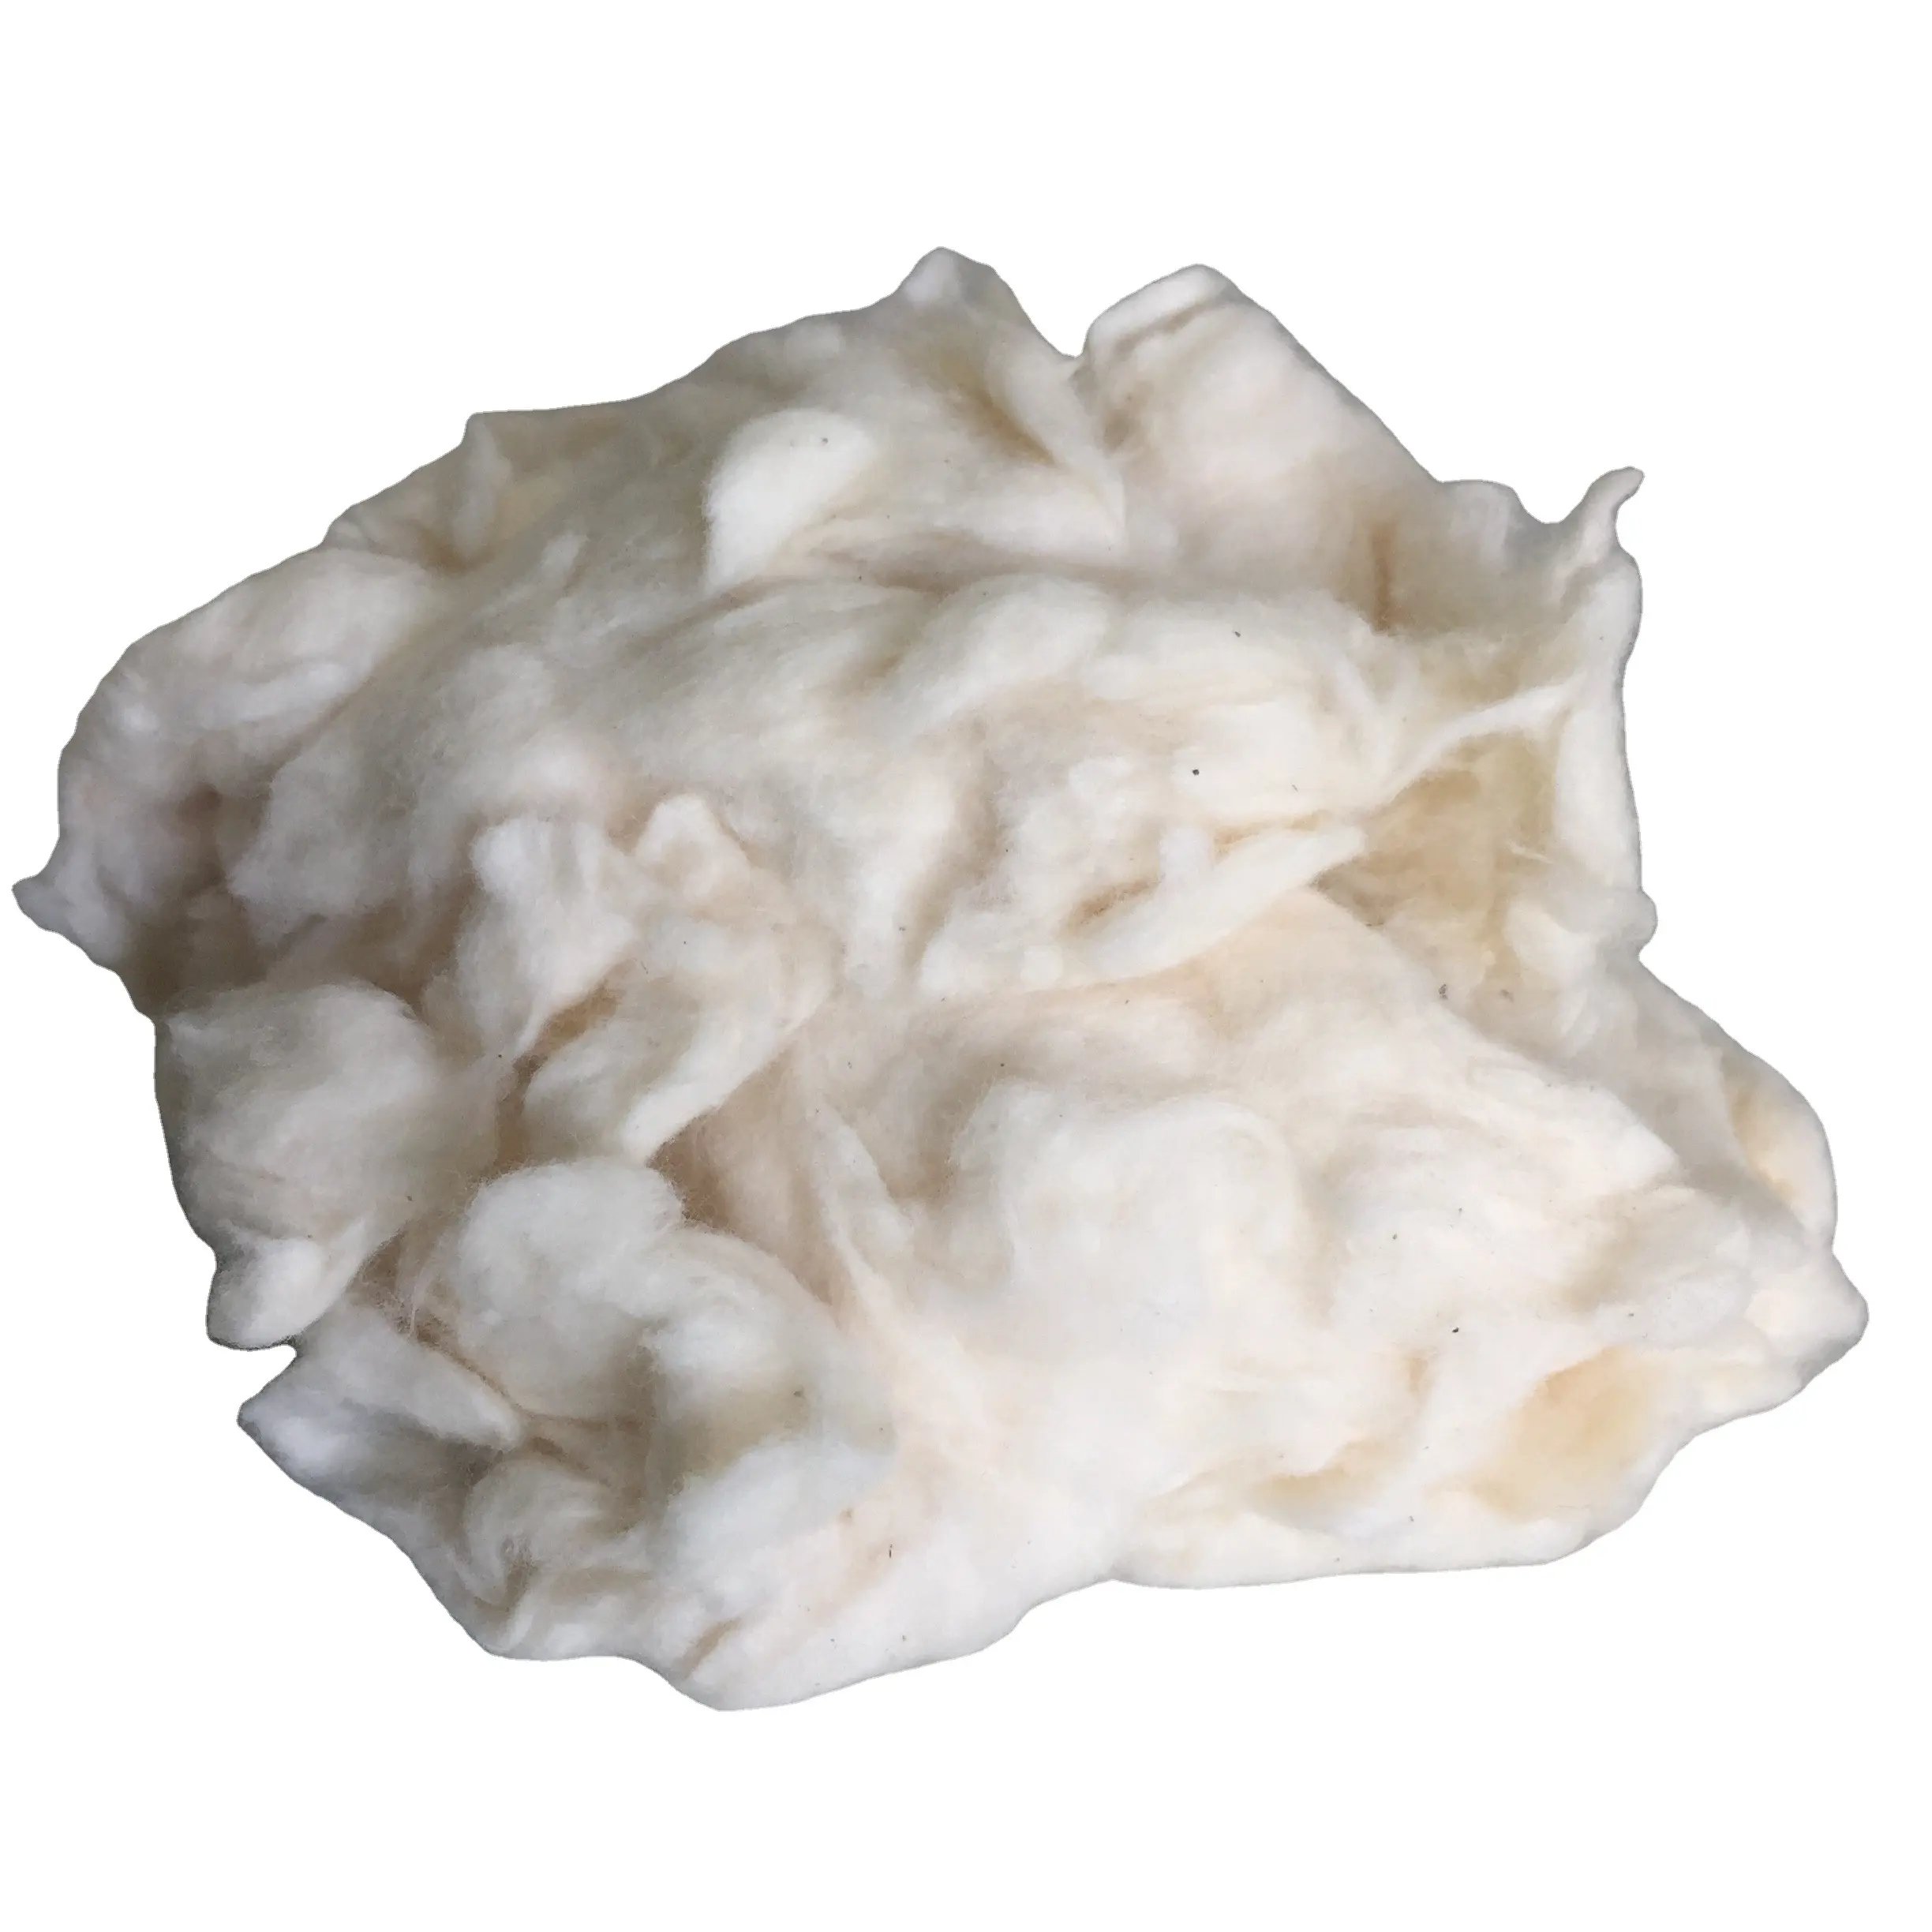 Comber Noil Natural Bleached/unbleached Cotton Bale best price for Spinning Yarn  - Ms. Mira